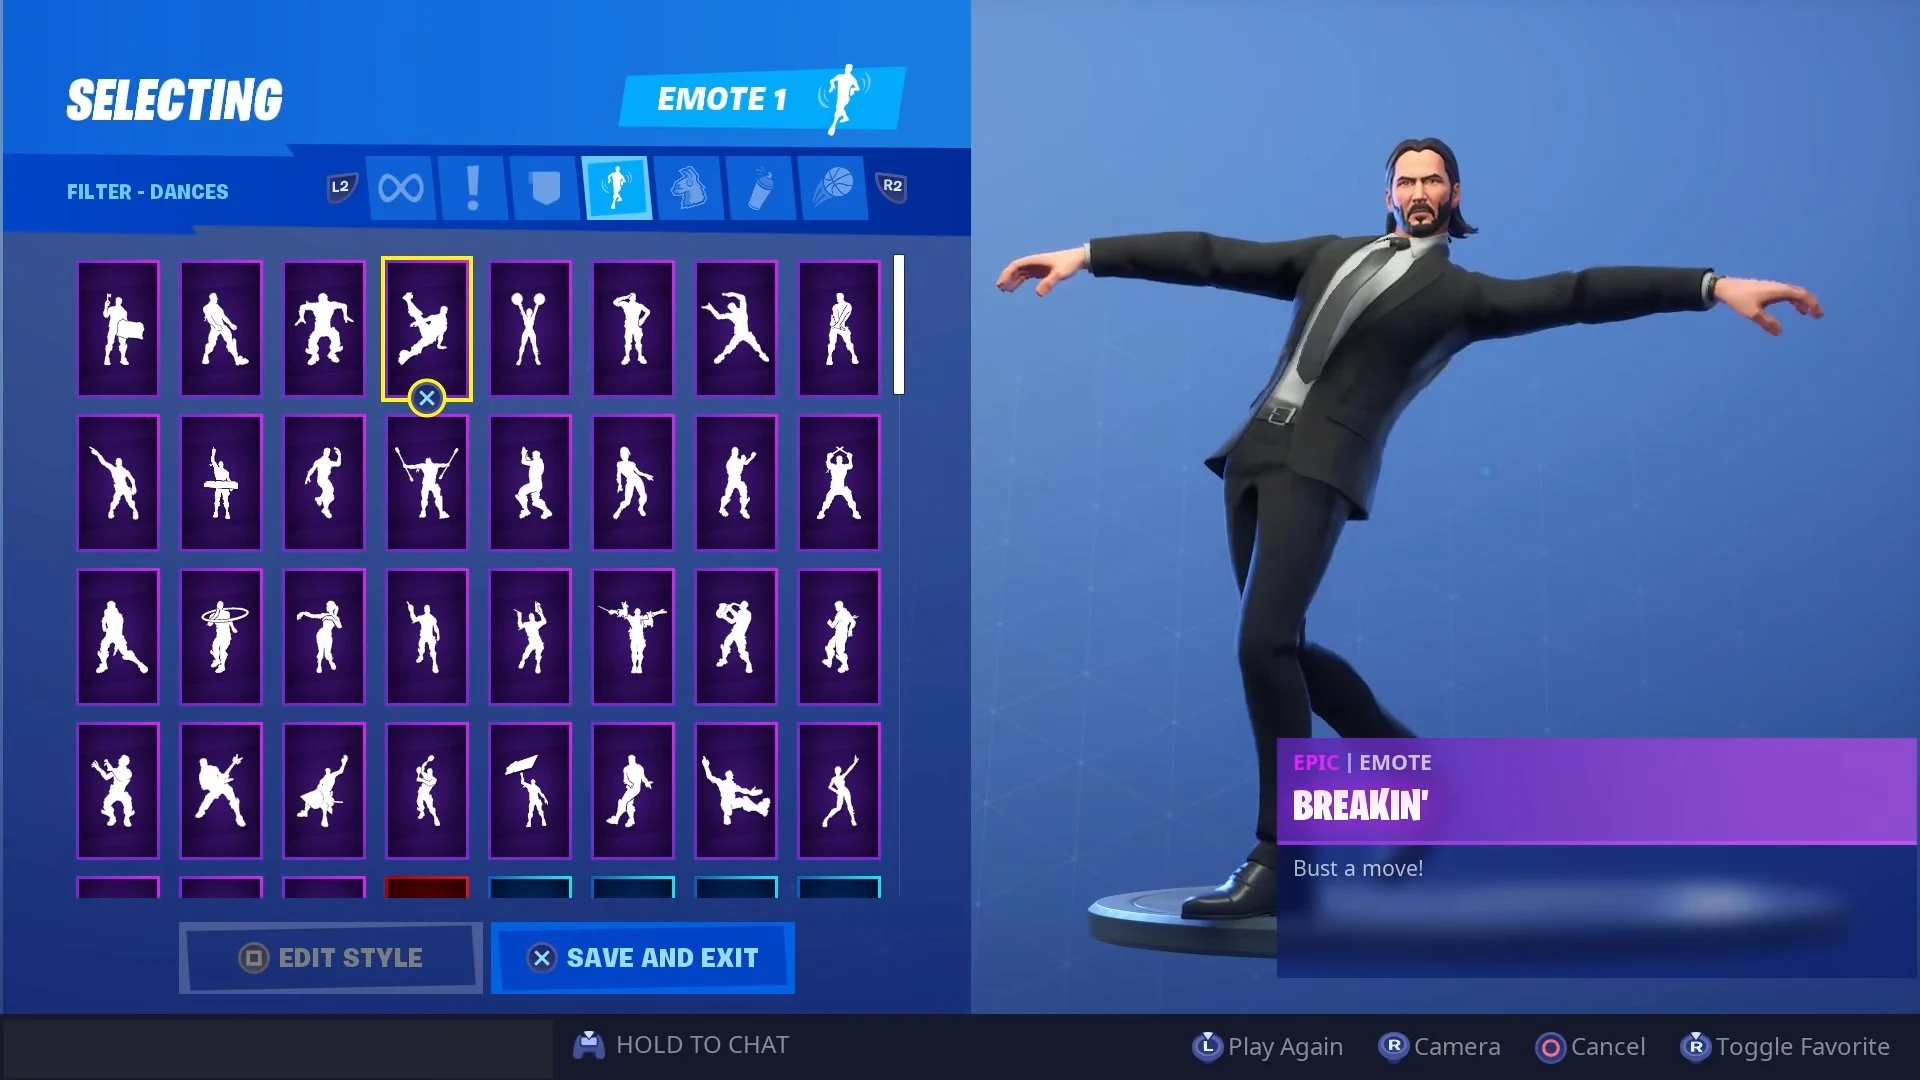 The John Wick Outfit From Fortnite Was Cashing In On The Hype Behind The Movie.